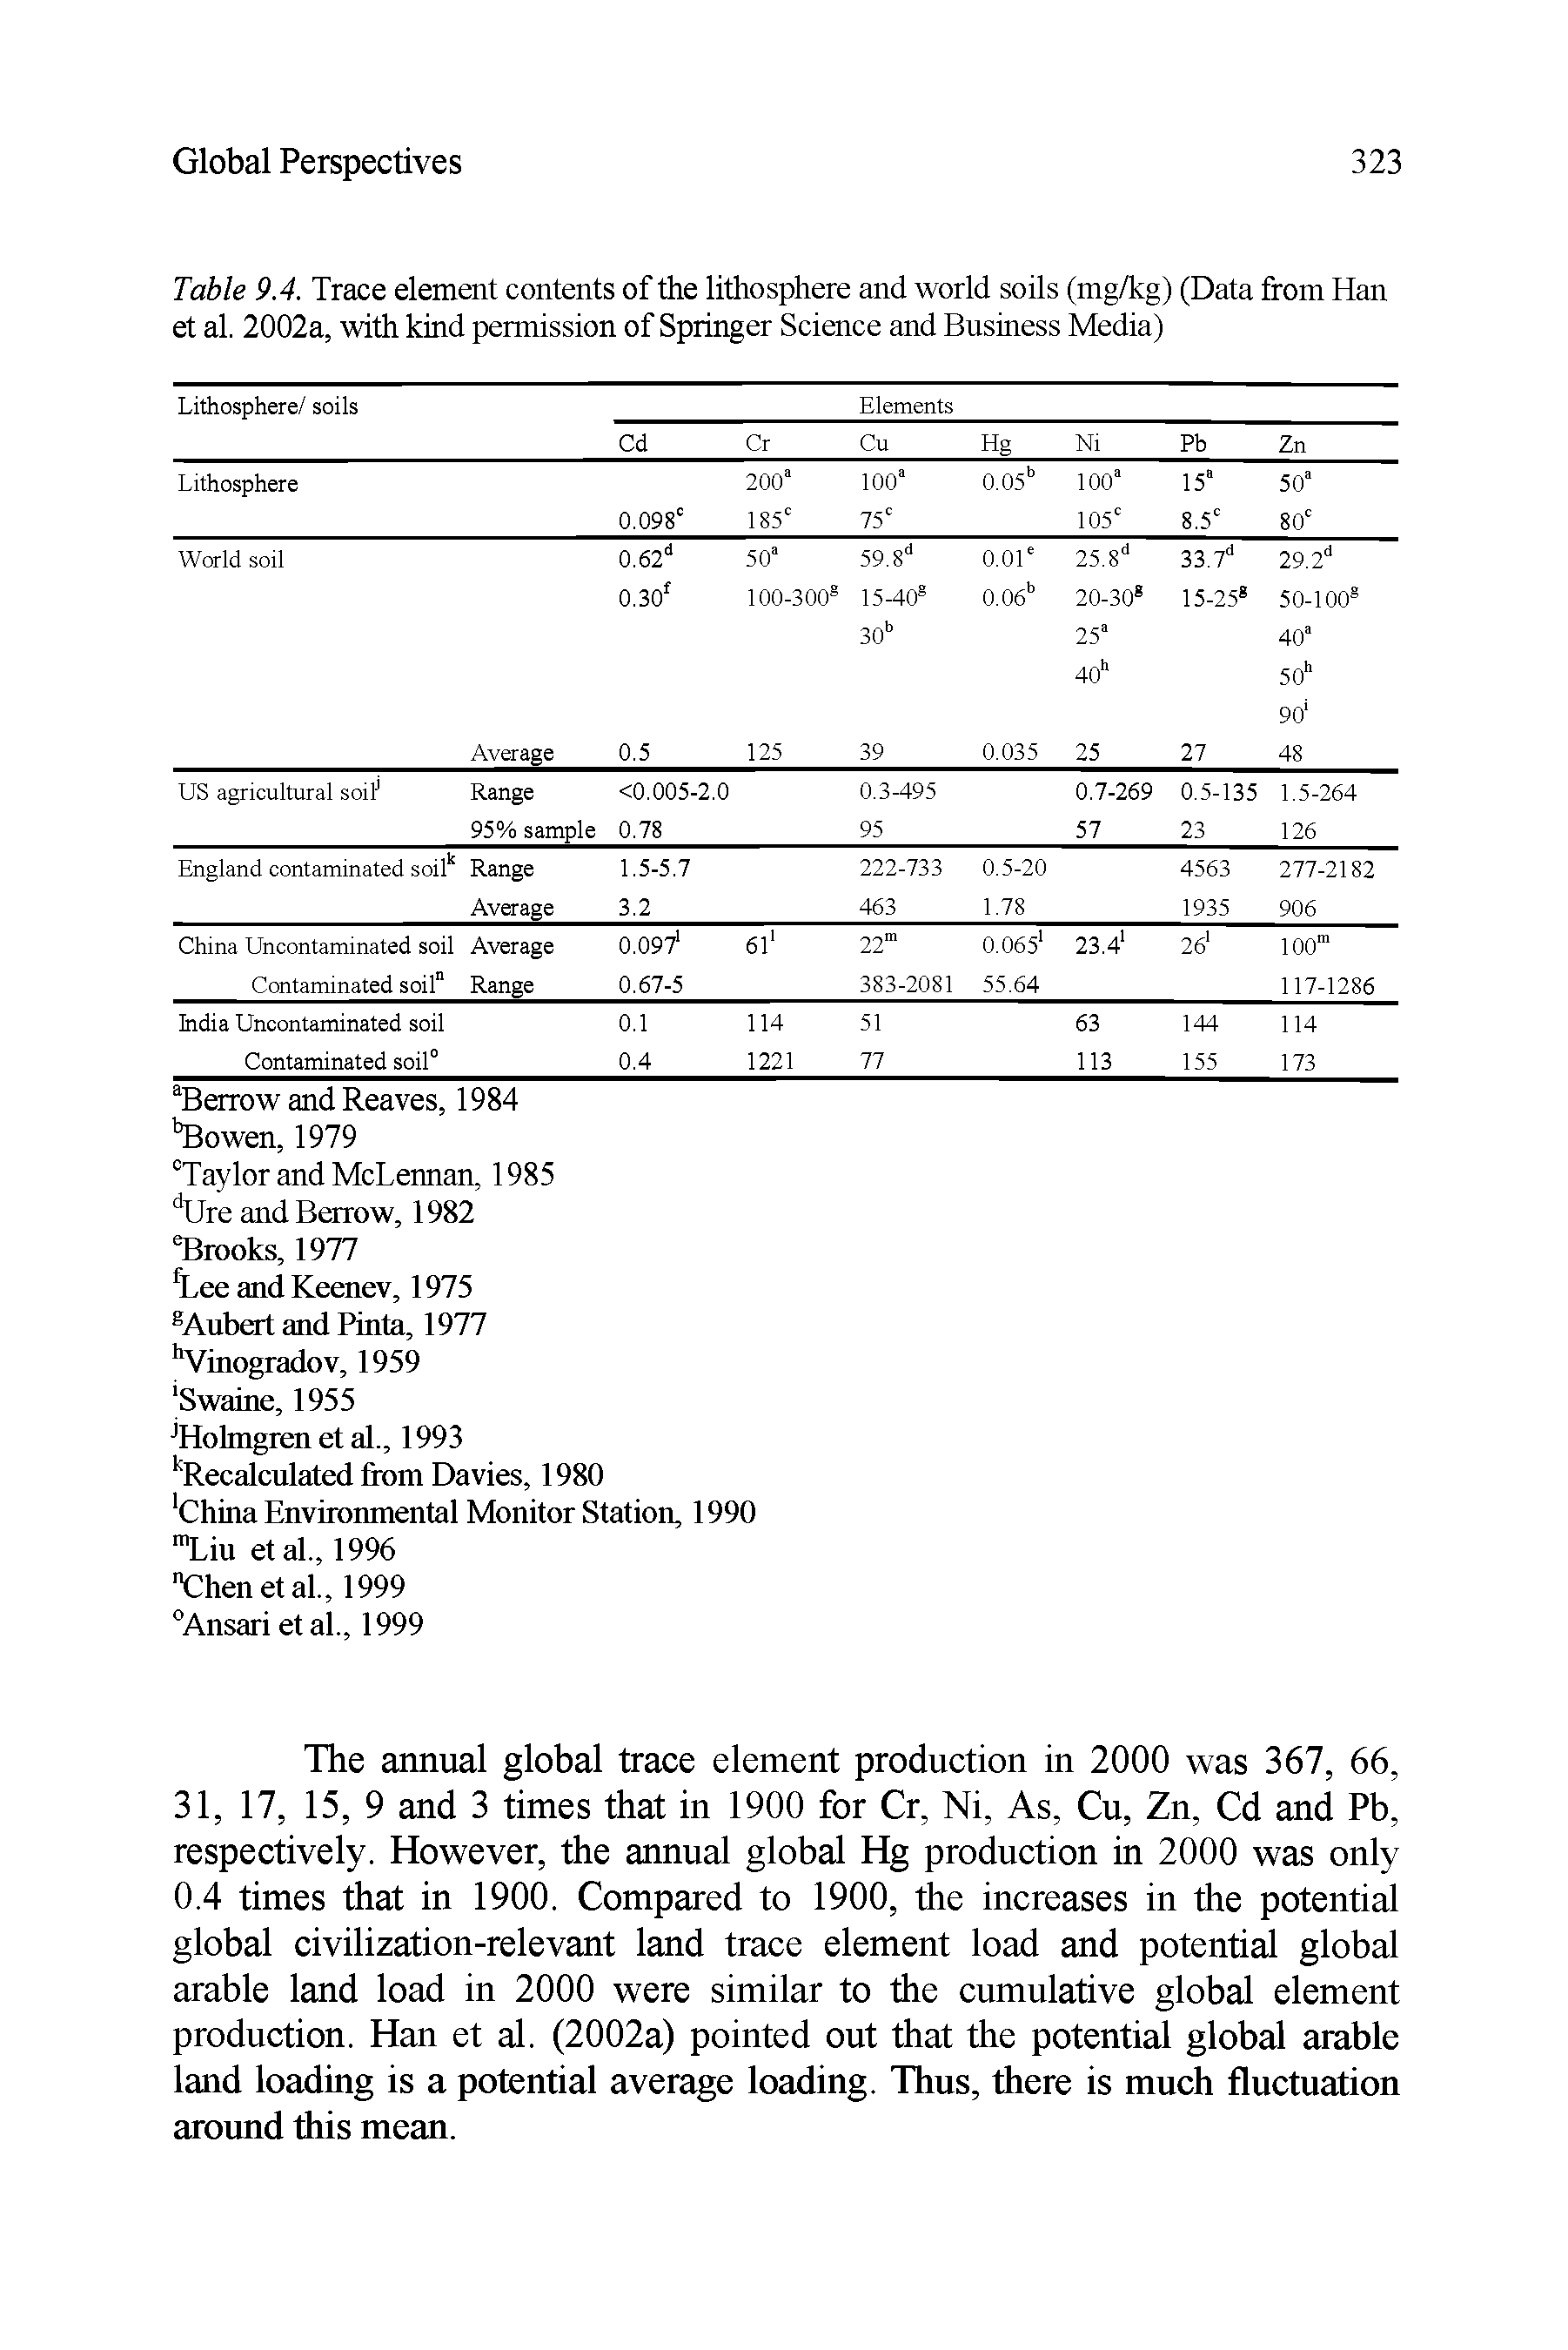 Table 9.4. Trace element contents of the lithosphere and world soils (mg/kg) (Data from Han et al. 2002a, with kind permission of Springer Science and Business Media)...